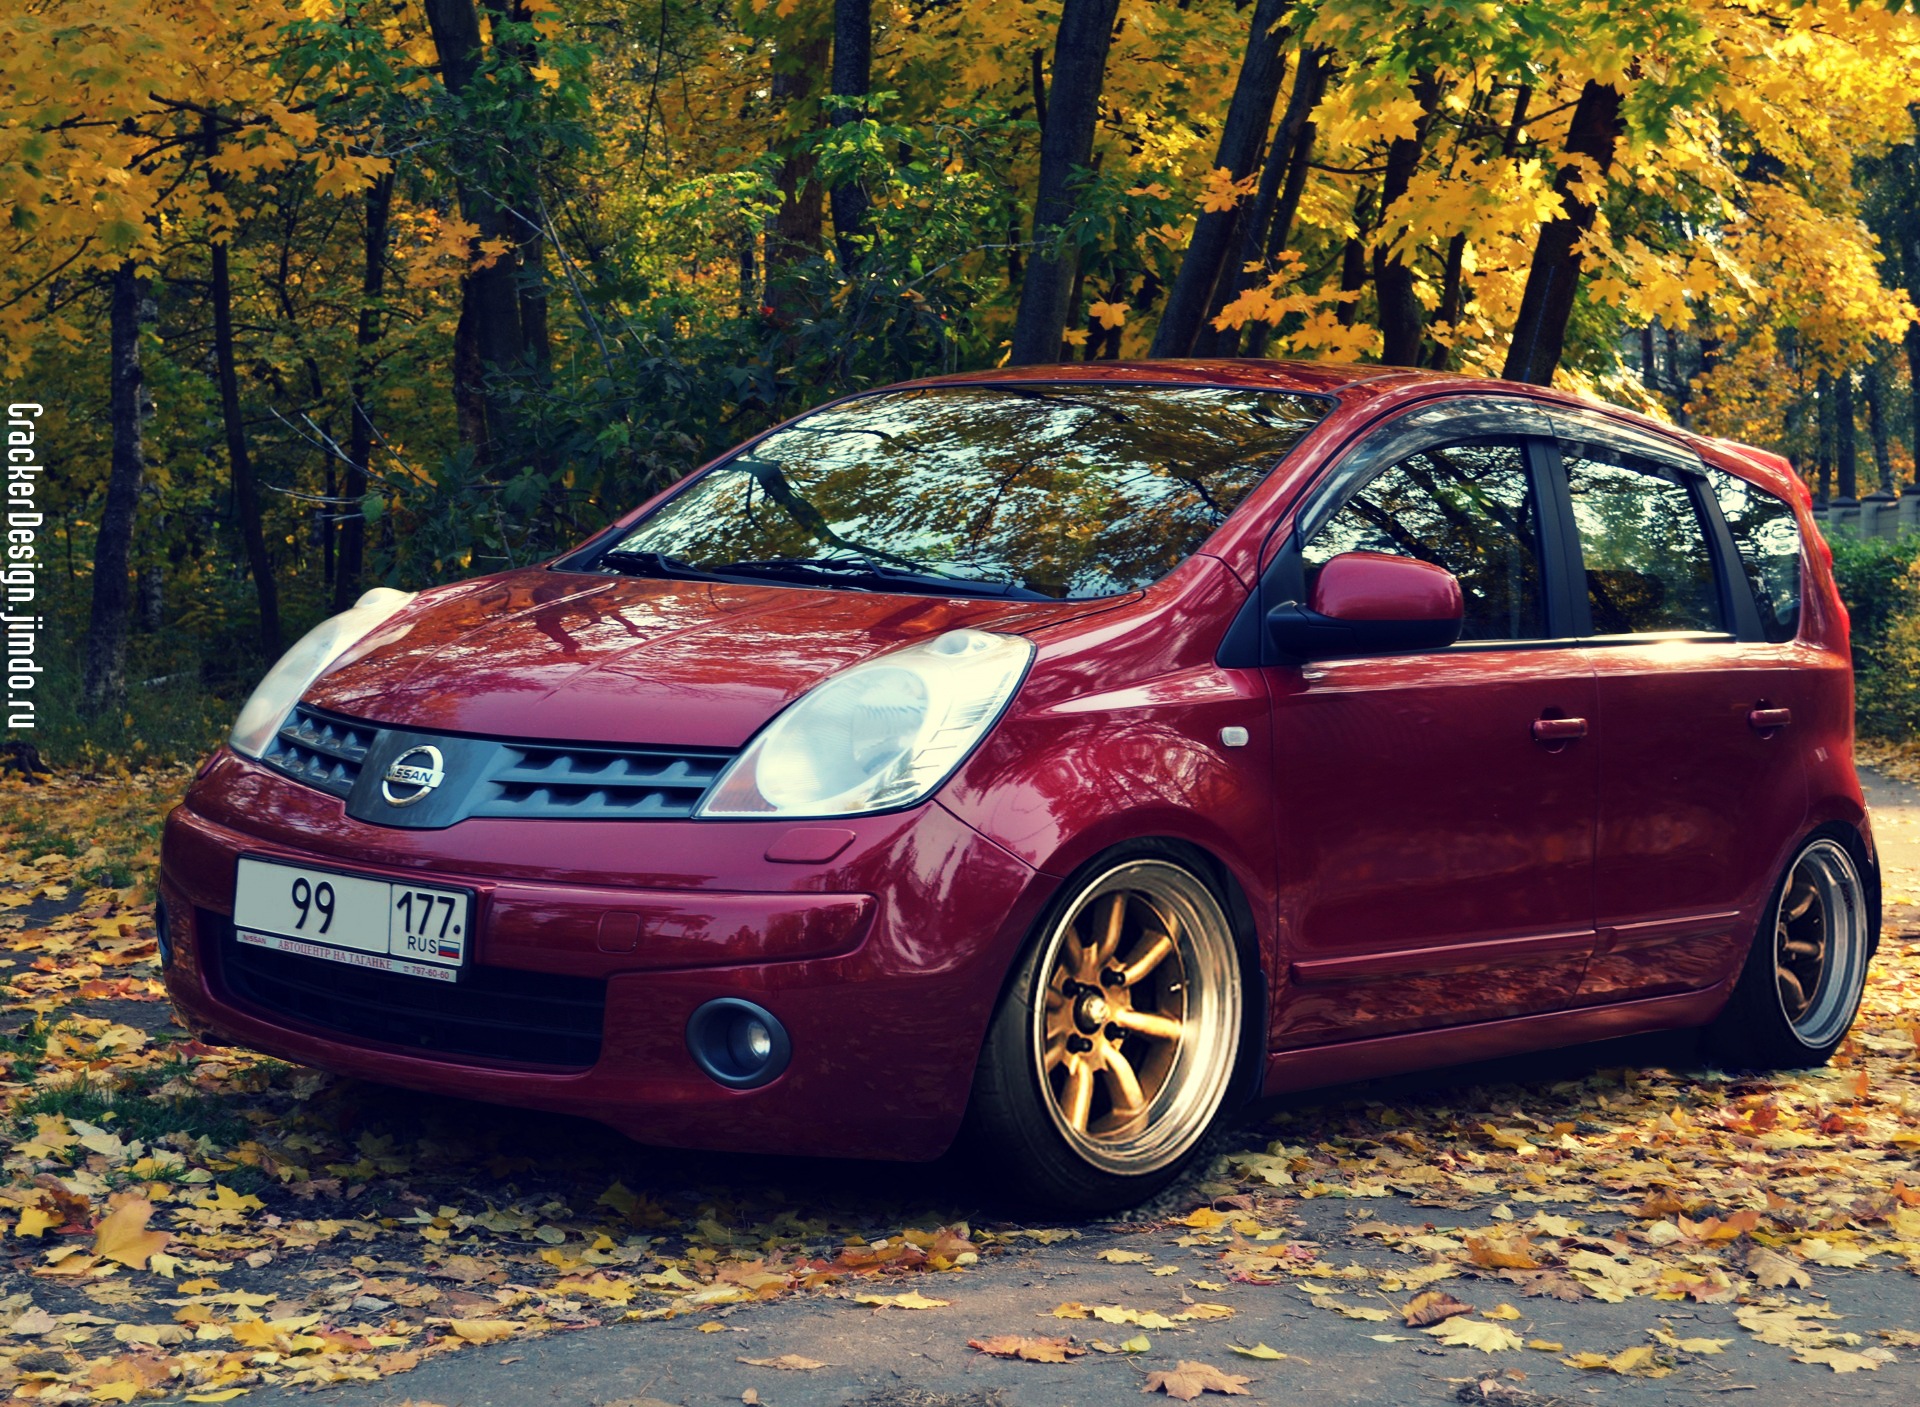 Nissan note колеса. Nissan Note 2008 Tuning. Ниссан ноут е11. Nissan Note e11 stance. Nissan Note 2011 1.6.